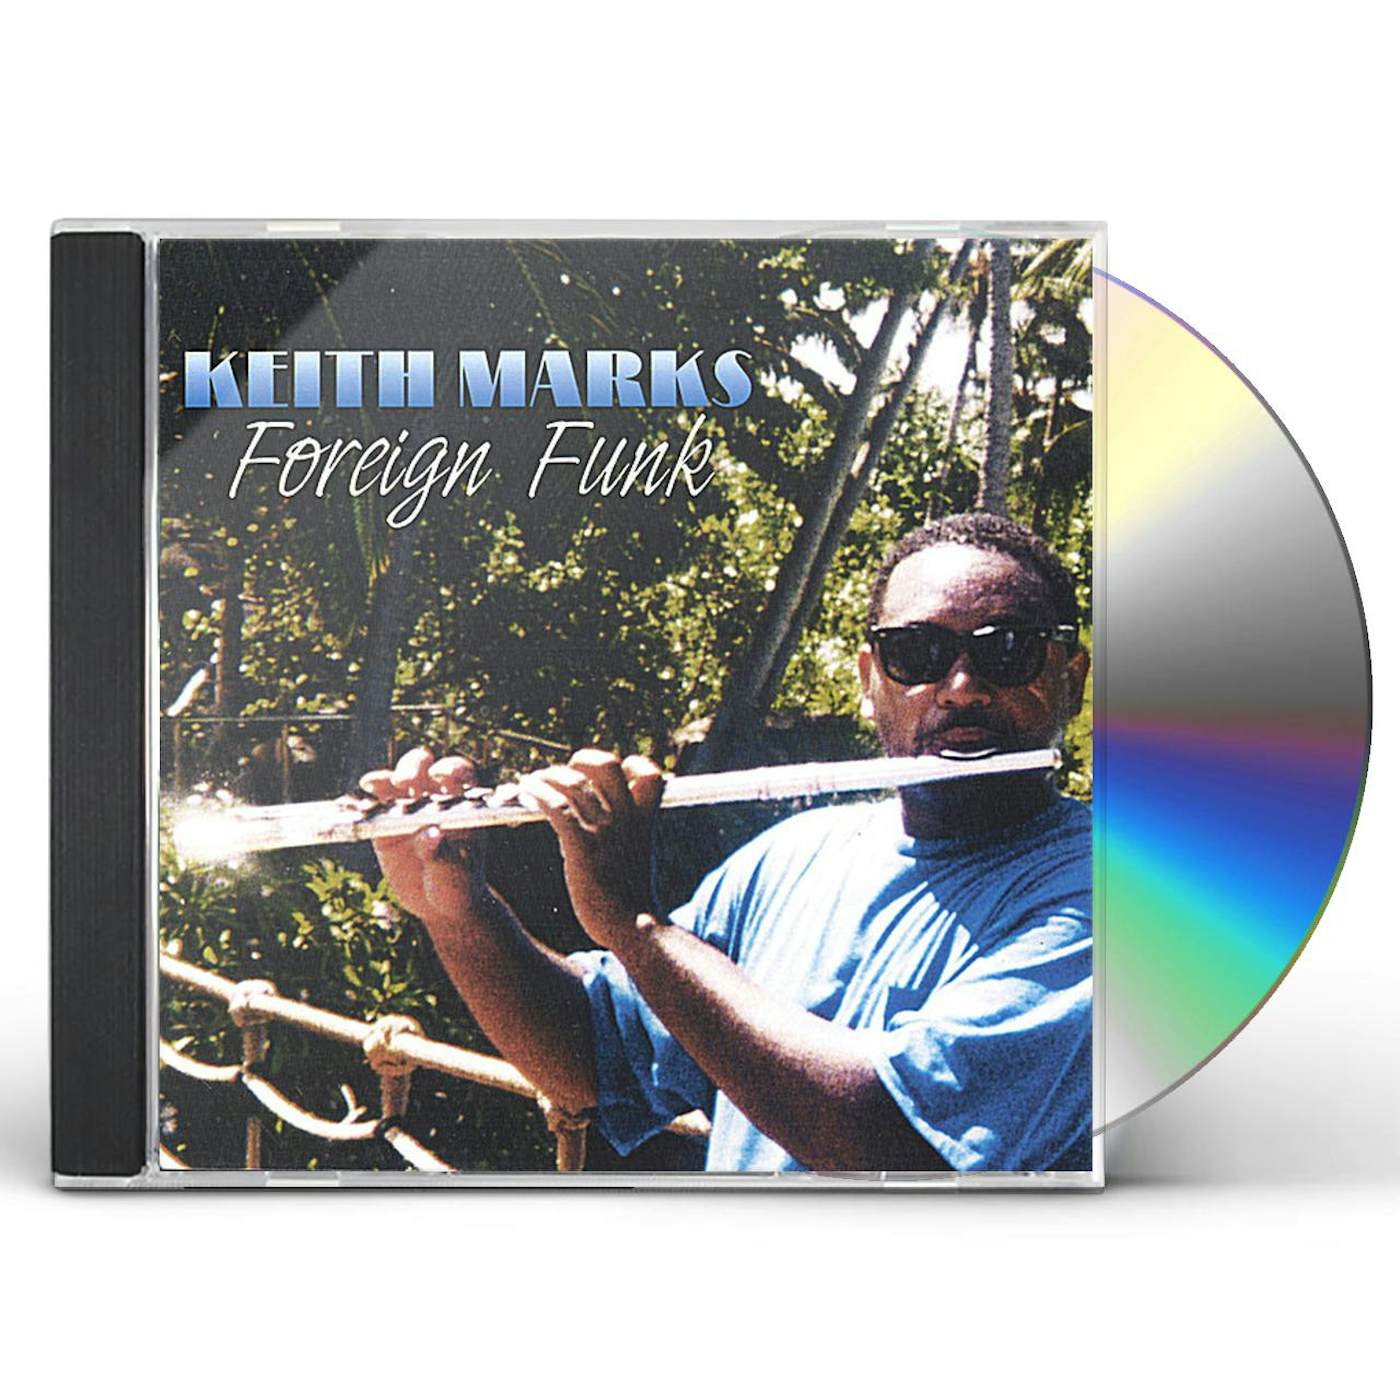 KEITH MARKS FOREIGN FUNK CD